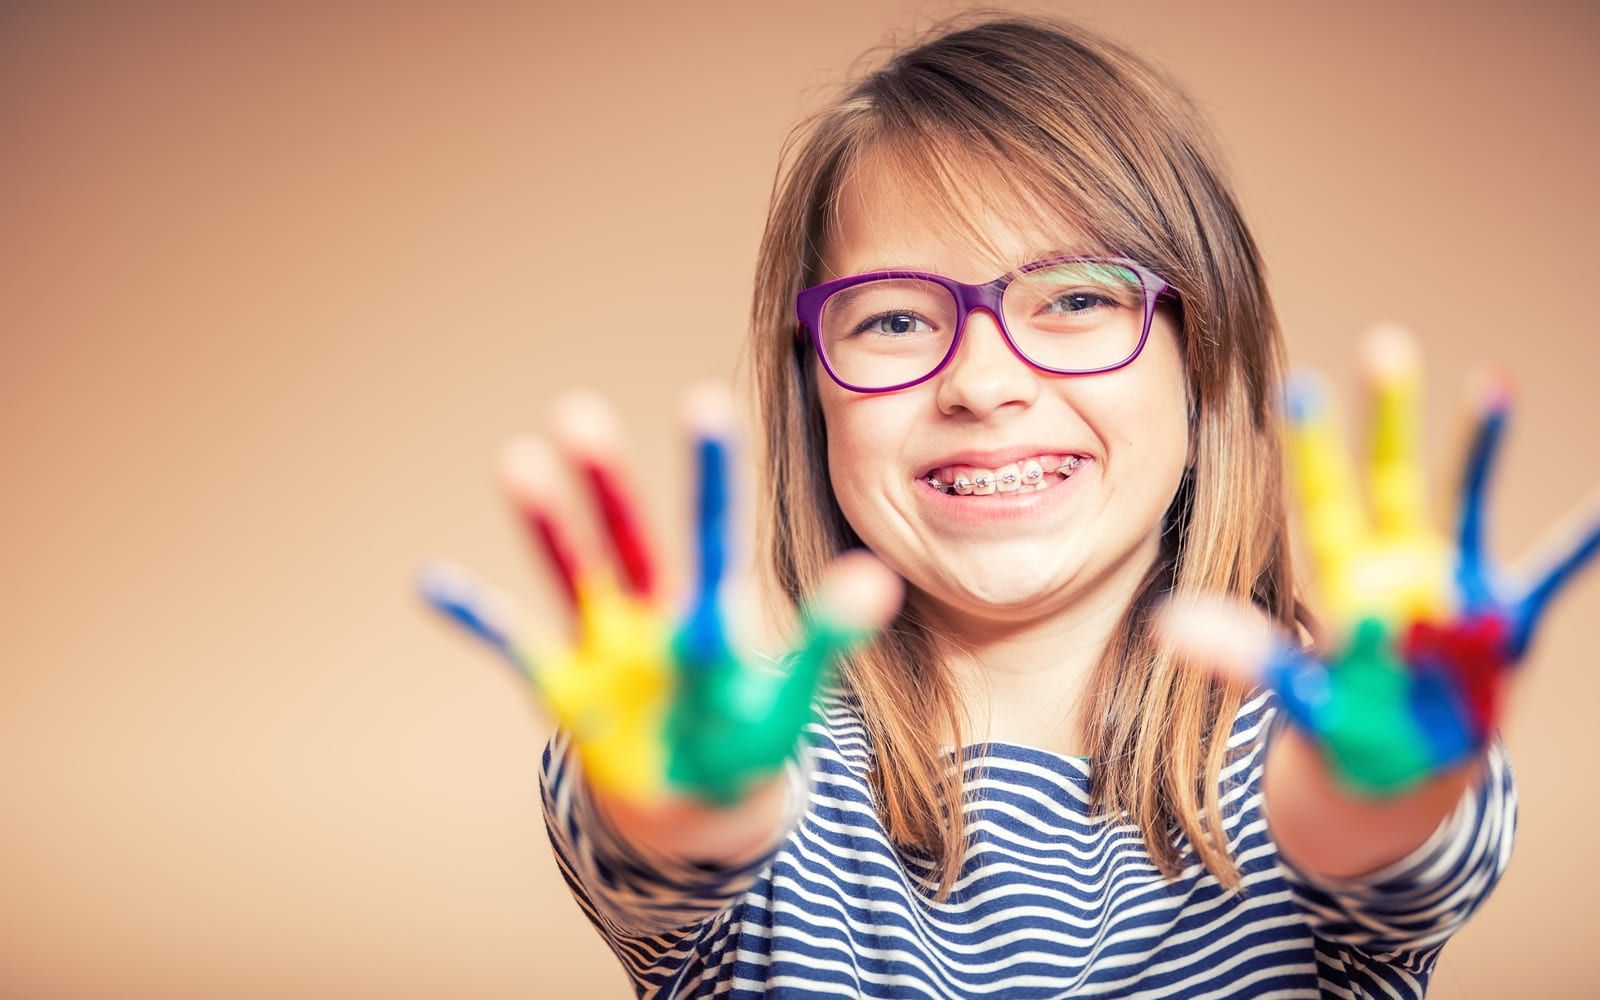 Child with braces and colored paint on hands